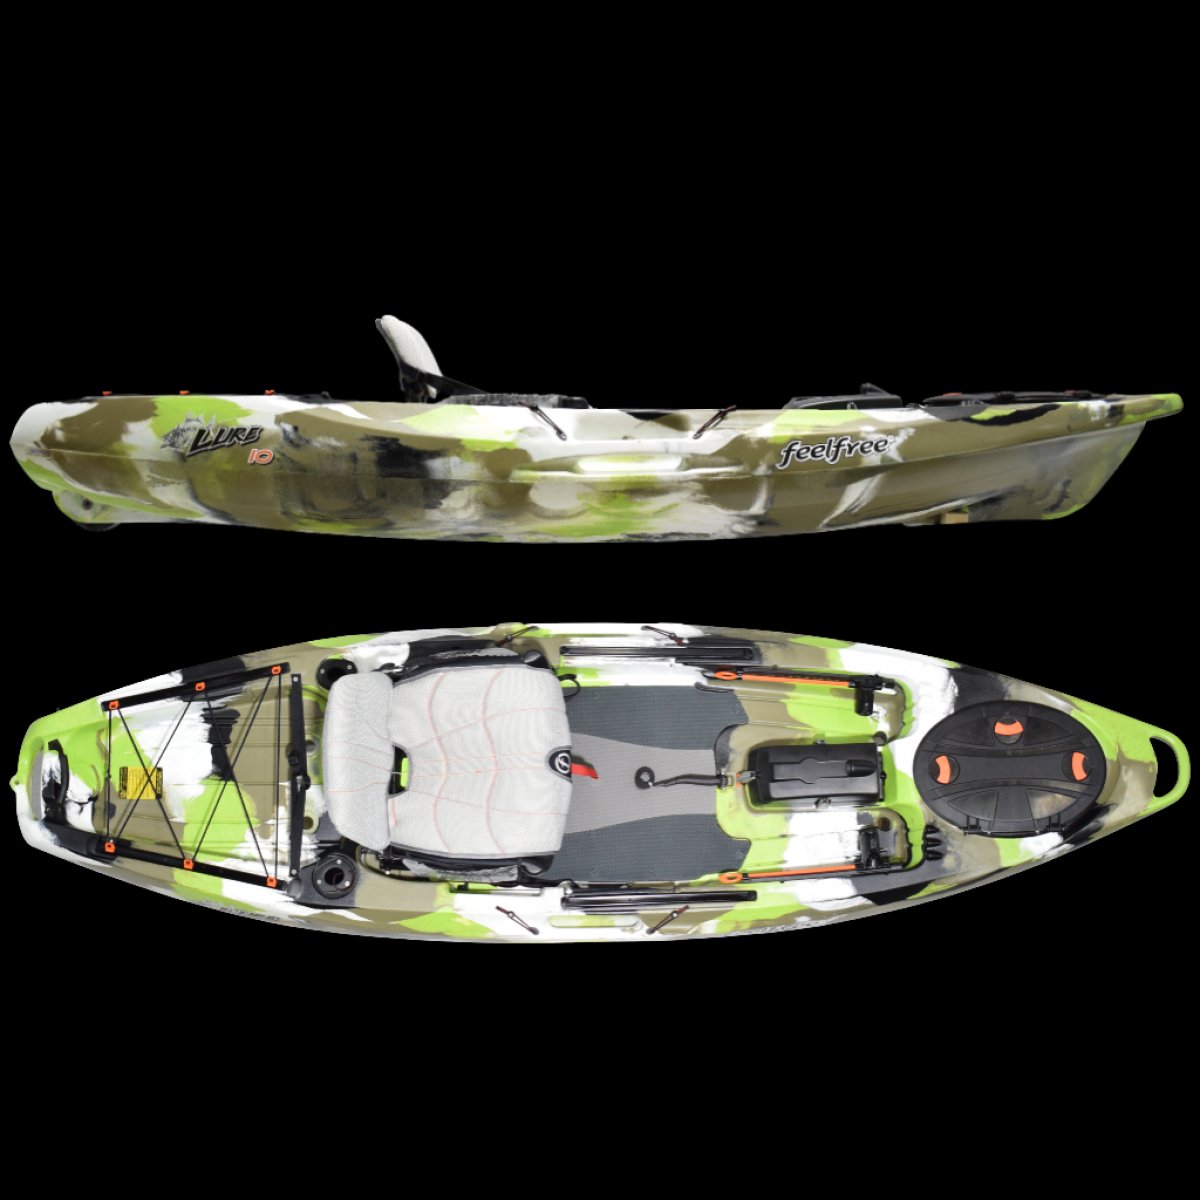 Brand new Feel Free Lure 10 V2 sit on/stand up fishing kayak with rudder